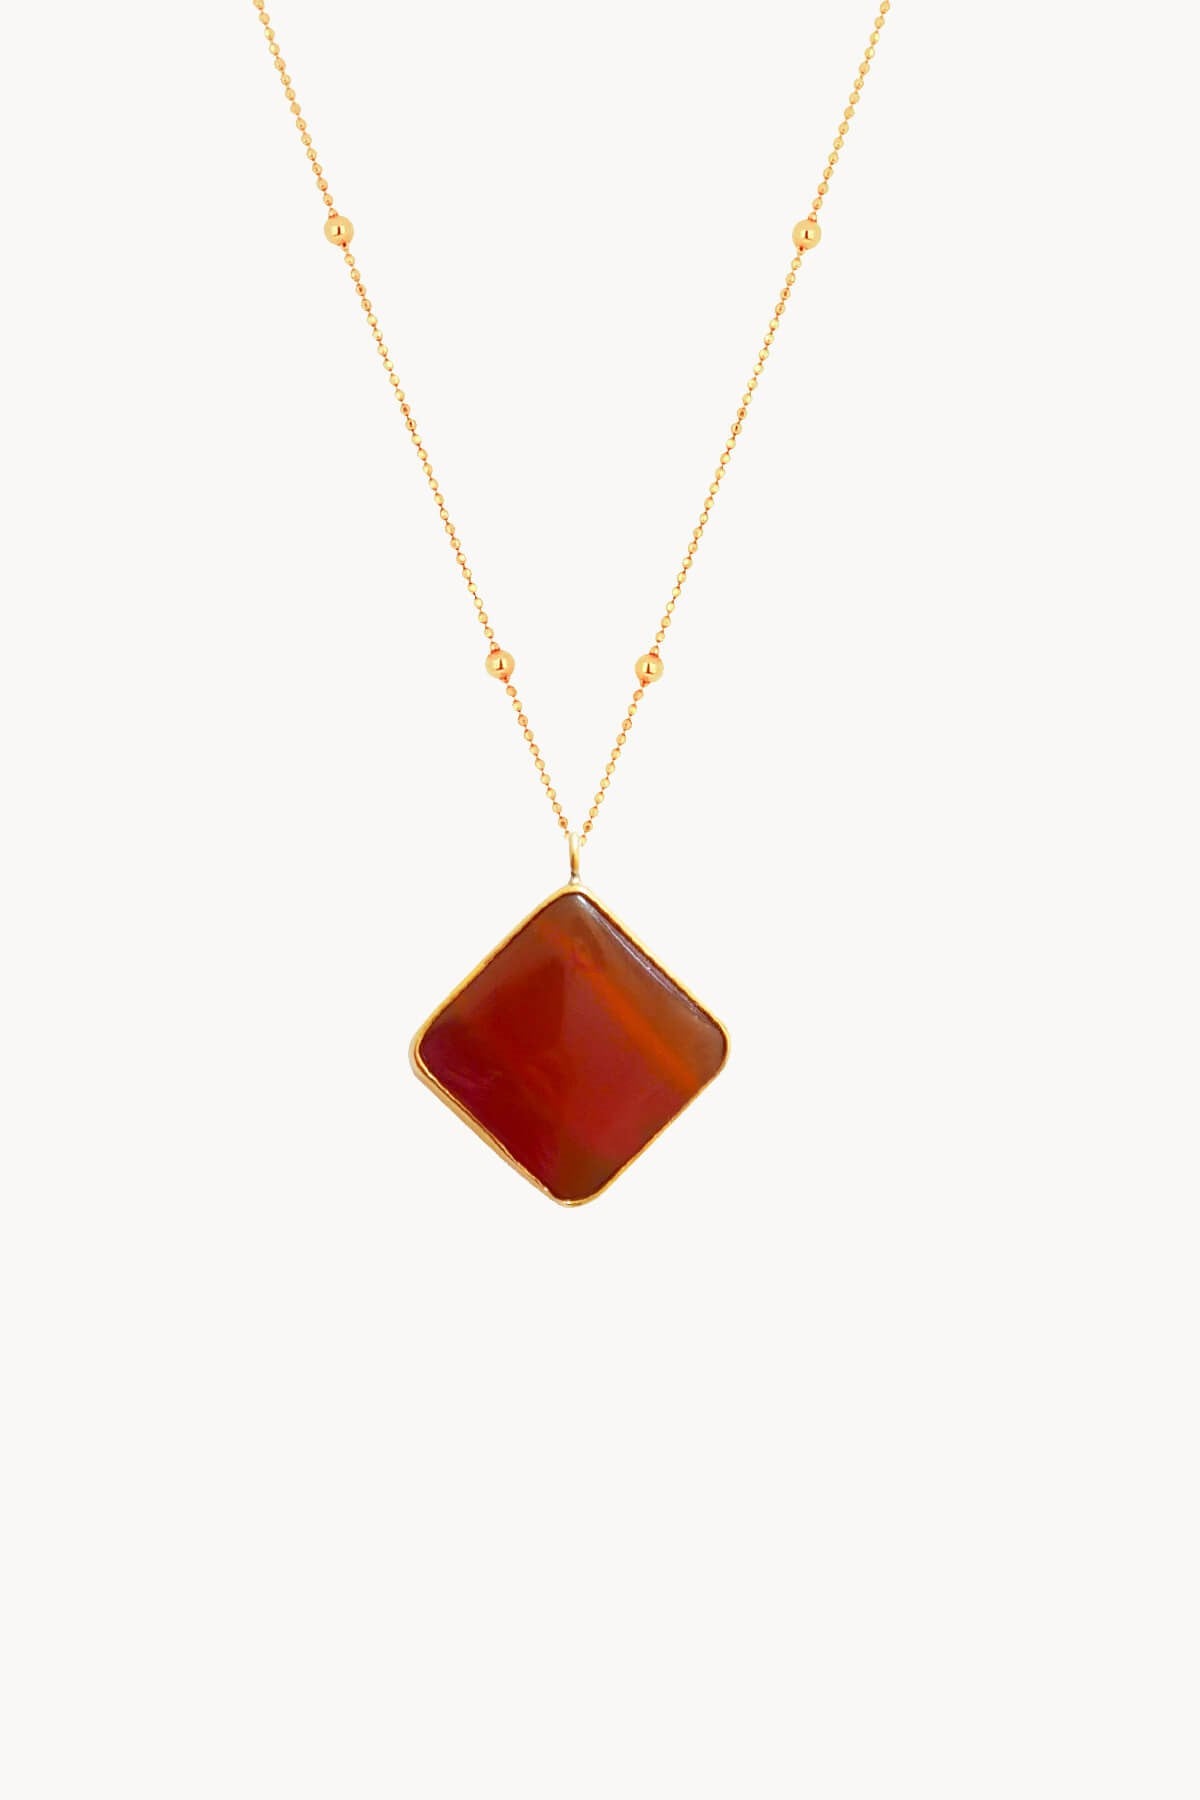 Natural Orange Agate Stone Necklace 925 Sterling Silver Gold Plated